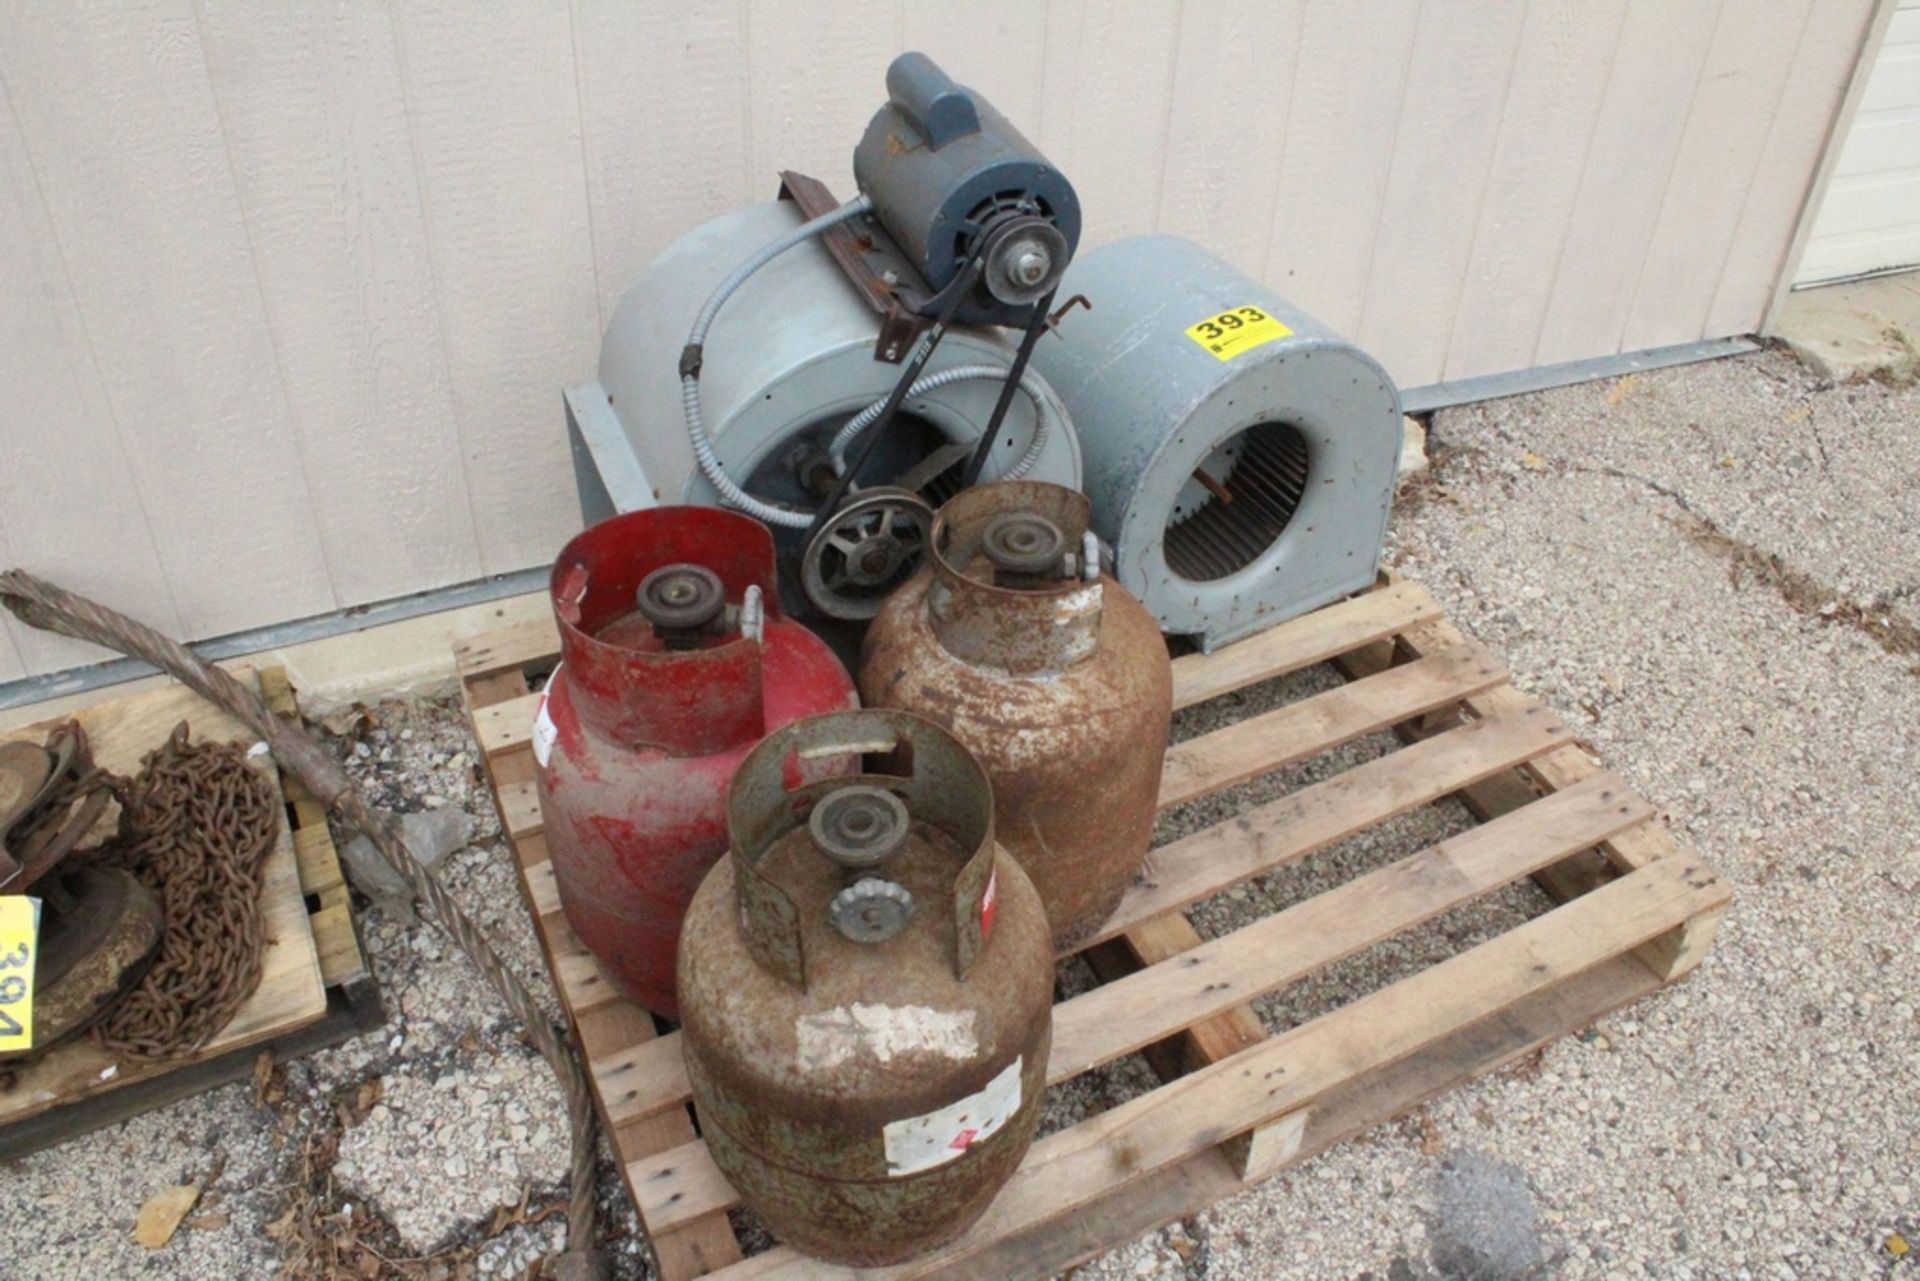 LOT OF 2 SQUIREL CAGES & 3 PROPANE TANKS ON SKID